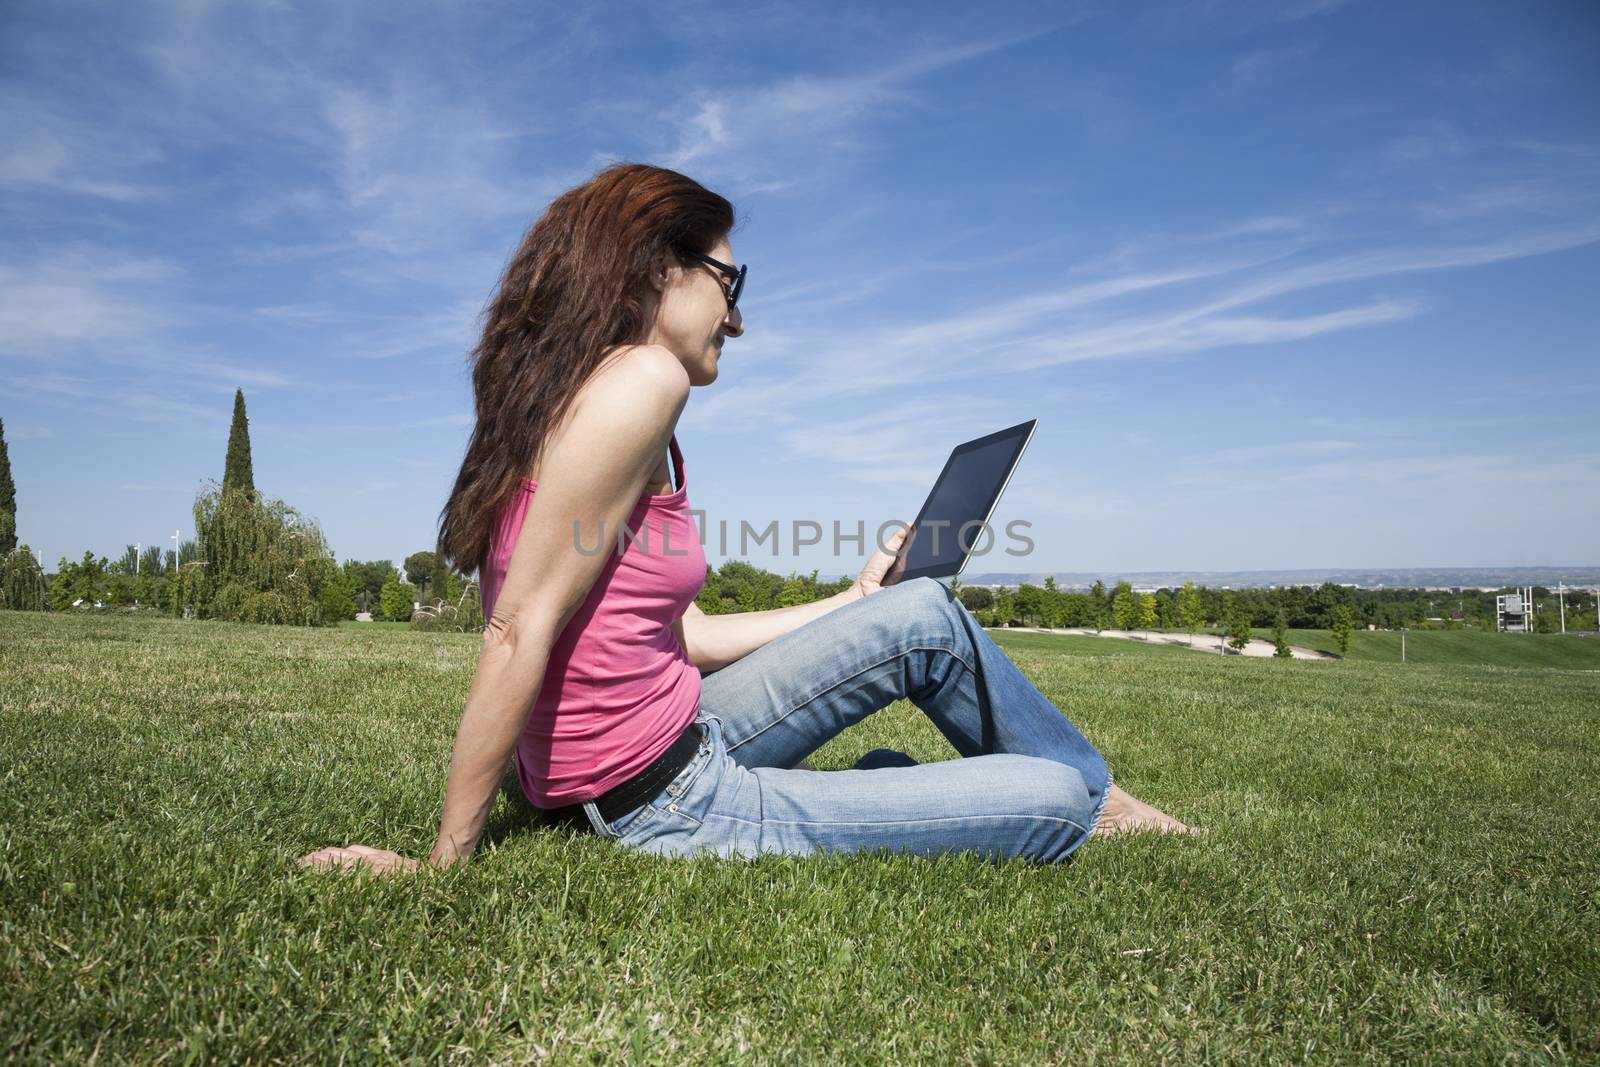 redhead woman blue jeans trousers pink shirt reading digital tablet blank screen sitting on green grass lawn in park